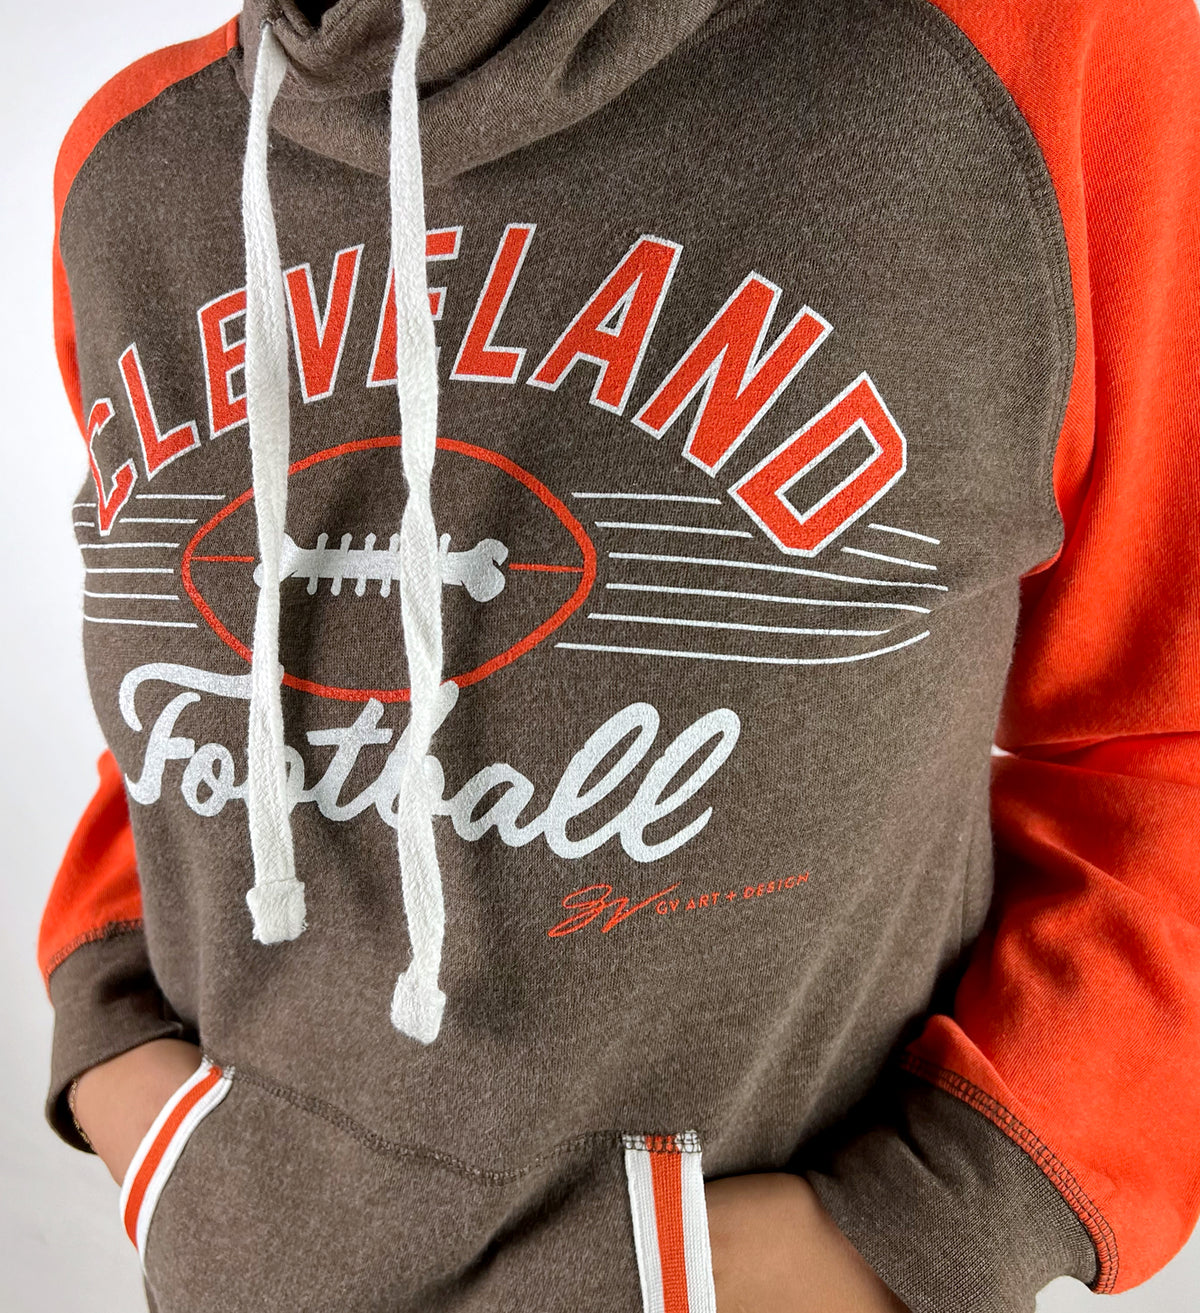 Support the Orange & Brown in our Cleveland Football Apparel